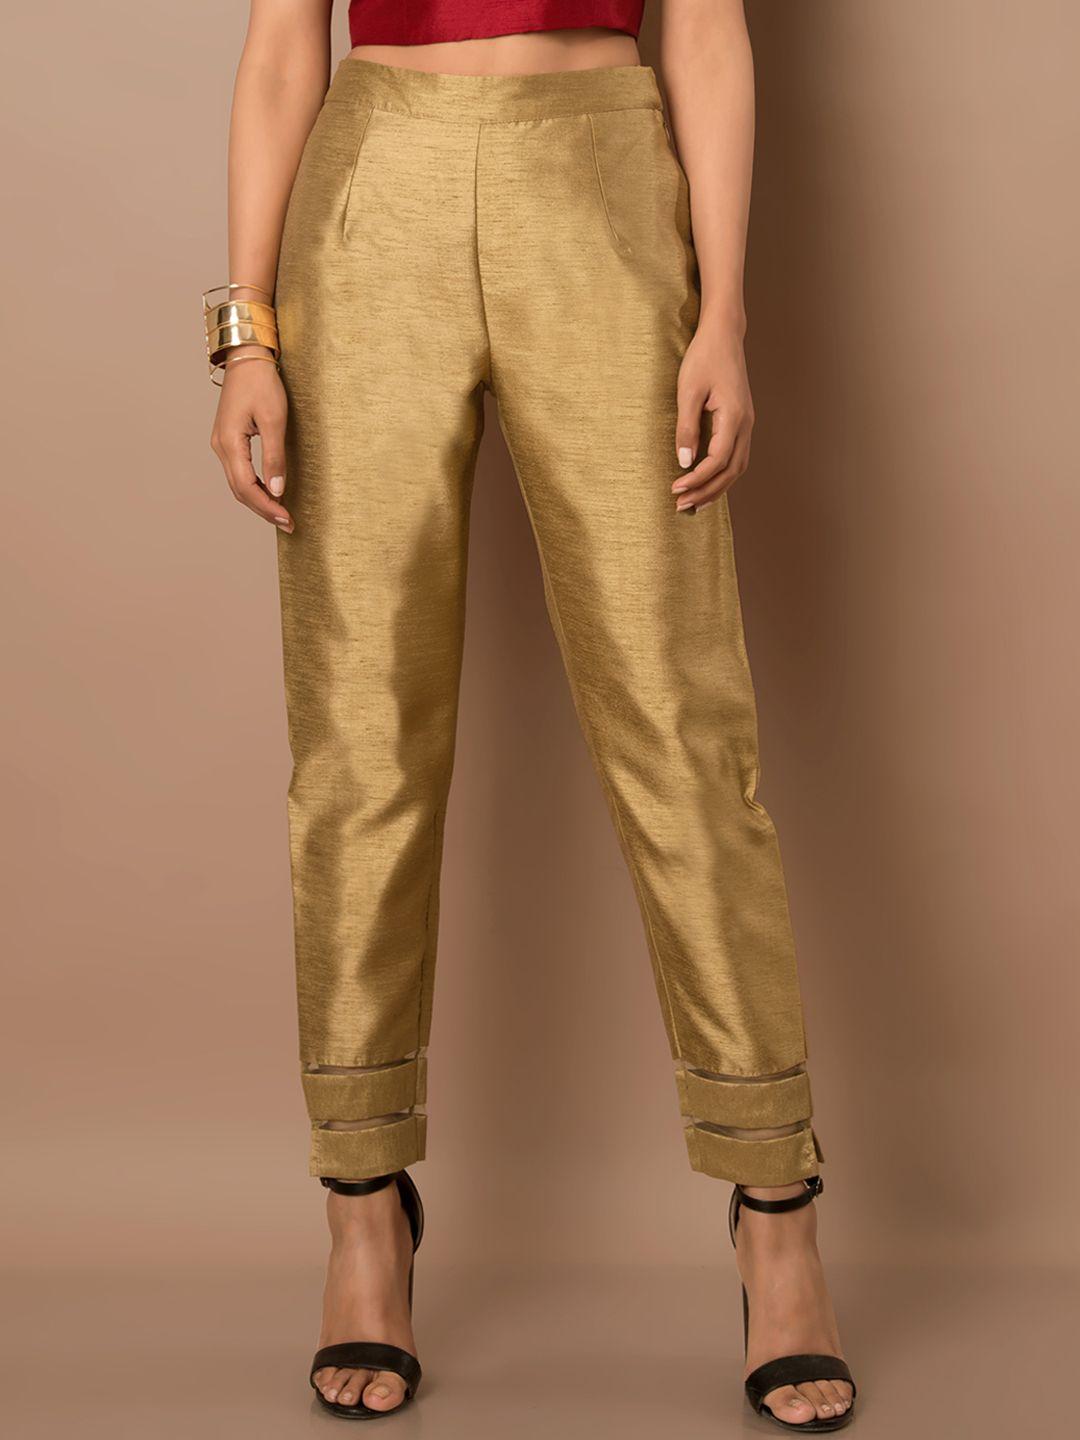 indya women gold-toned pencil slim fit solid cigarette trousers